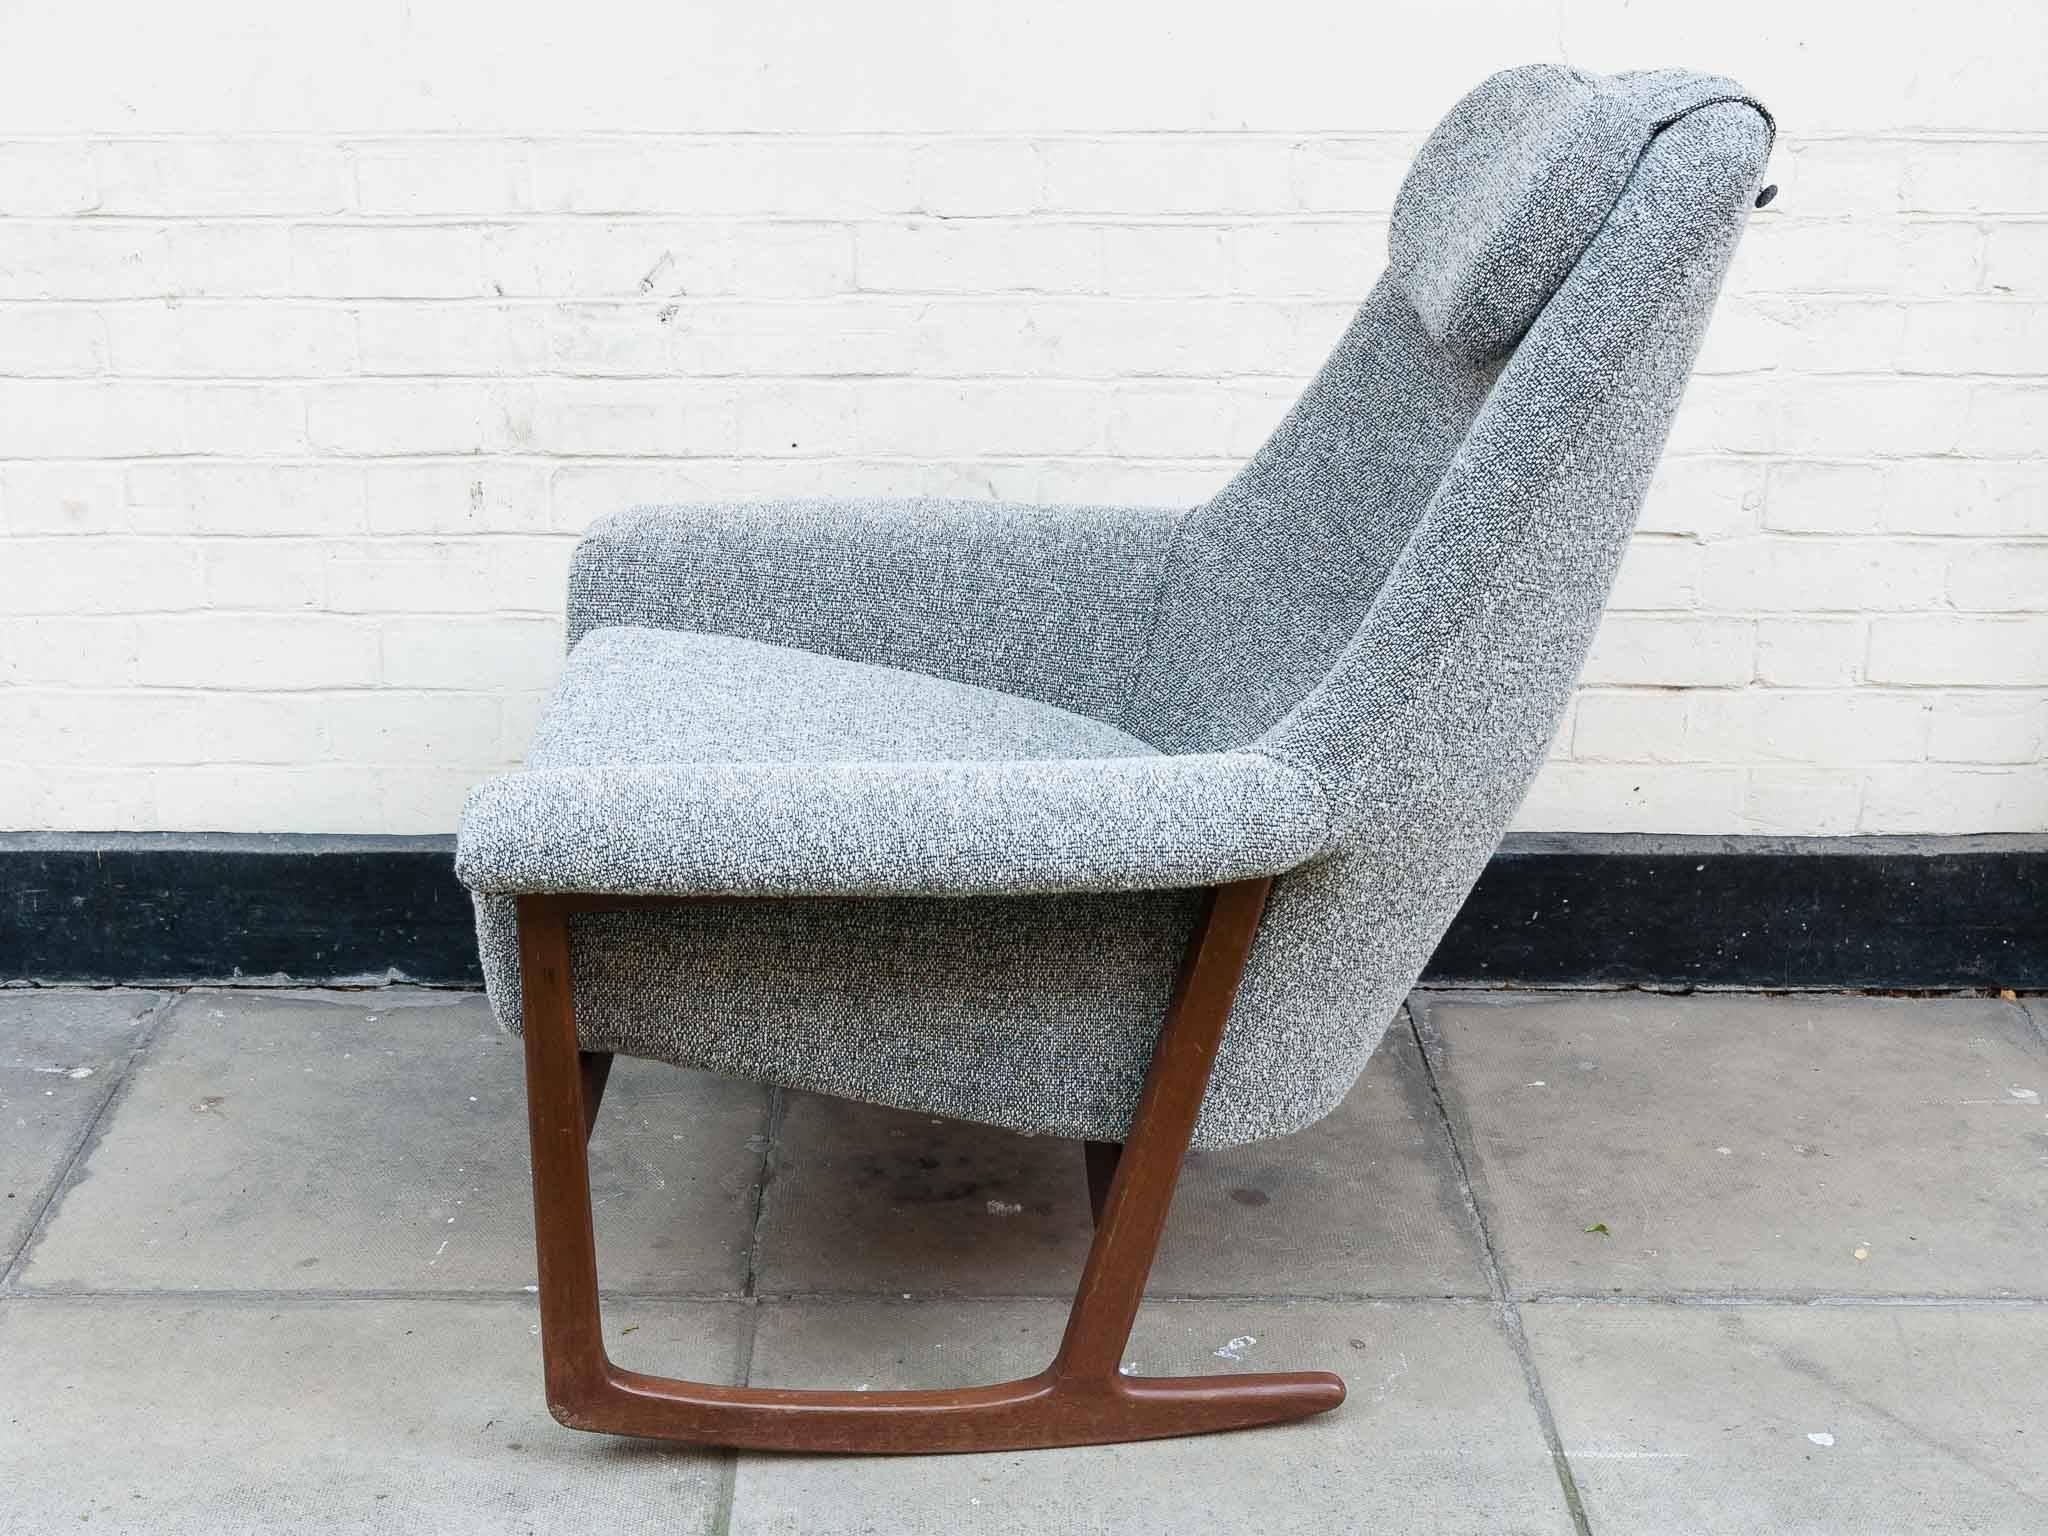 1960s Danish teak rocking chair restored and beautifully reupholstered in pure wool bouclé fabric by Bute Fabrics. Incredibly comfortable, stylish and functional. A wonderful long-lasting piece of furniture. Renowned upholster Stephen Moody M.A.